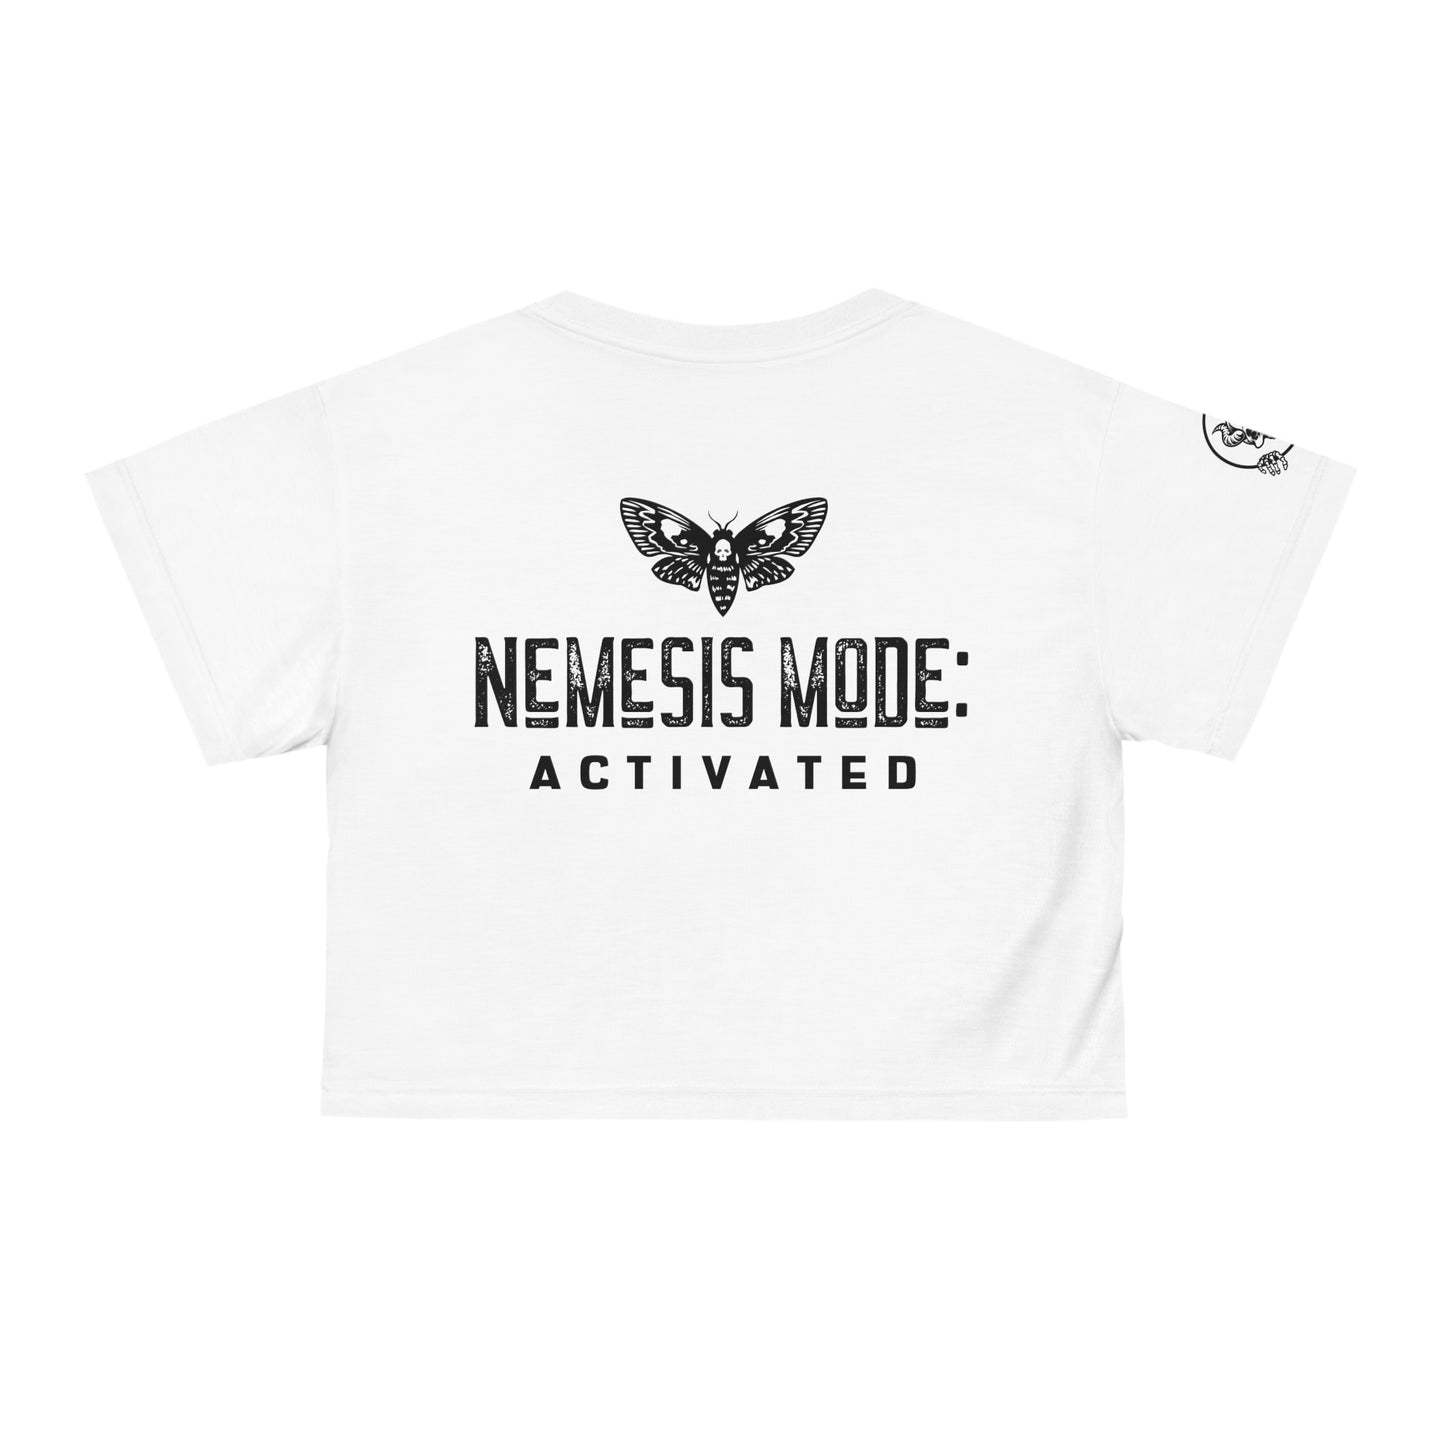 The "Strong Mode" Crop Tee (Death's Head Moth)